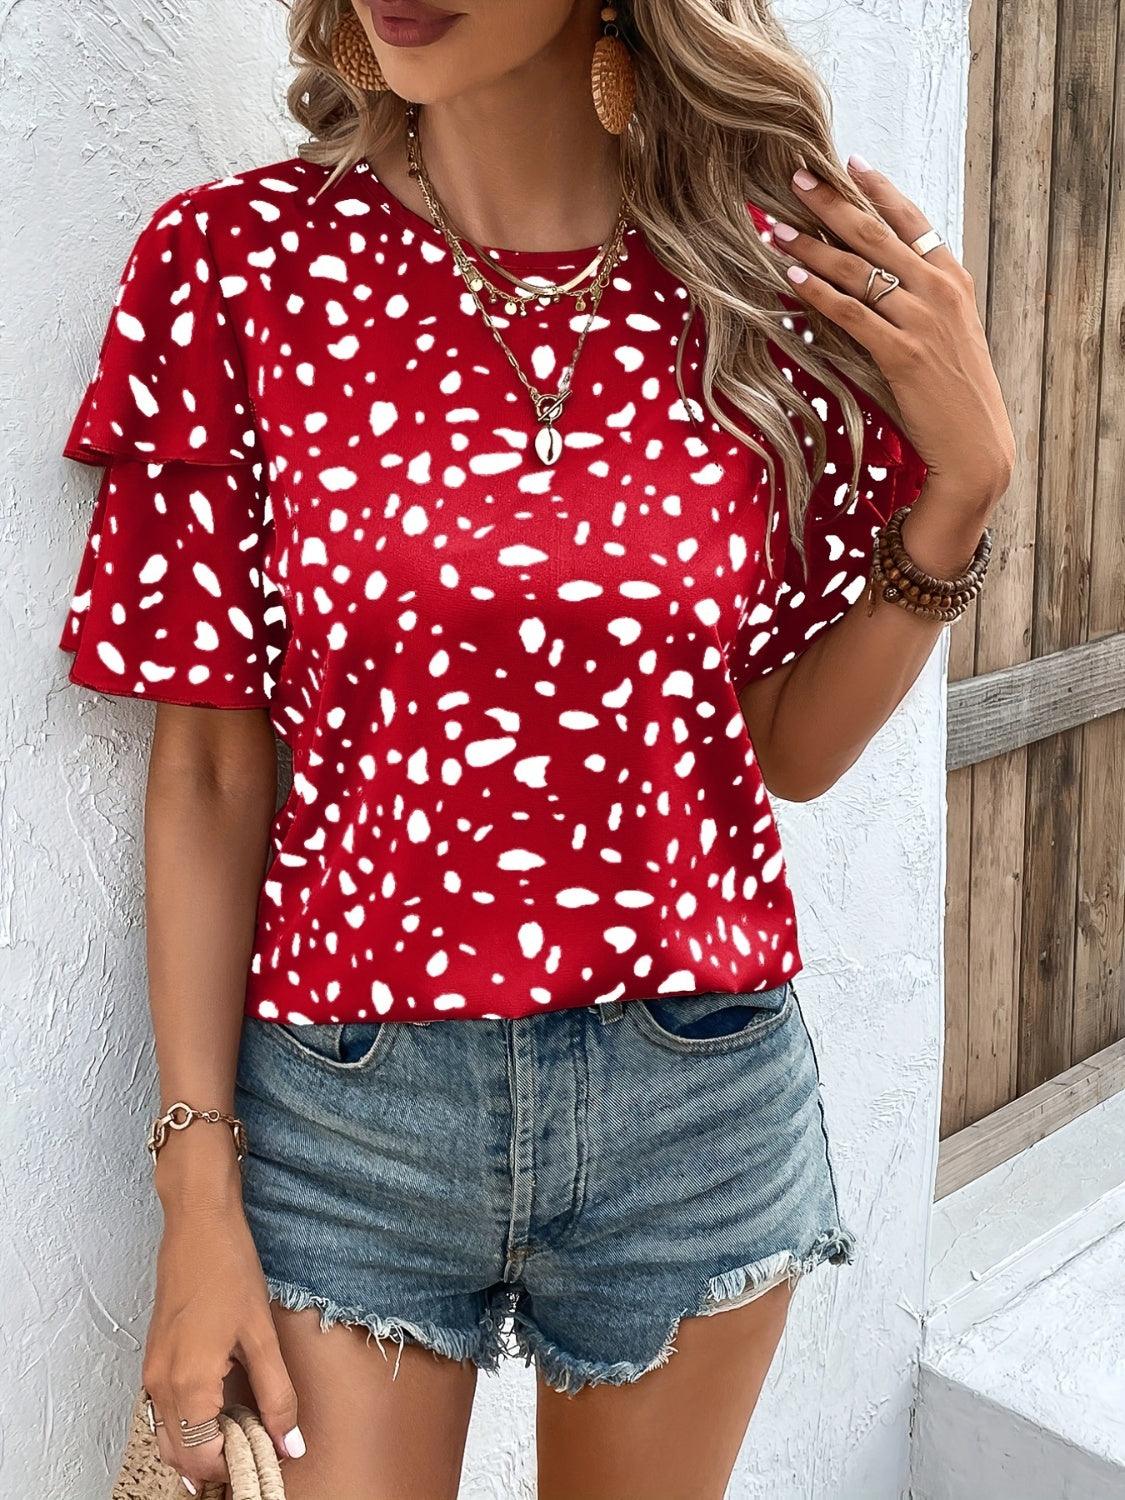 a woman wearing a red top with white spots